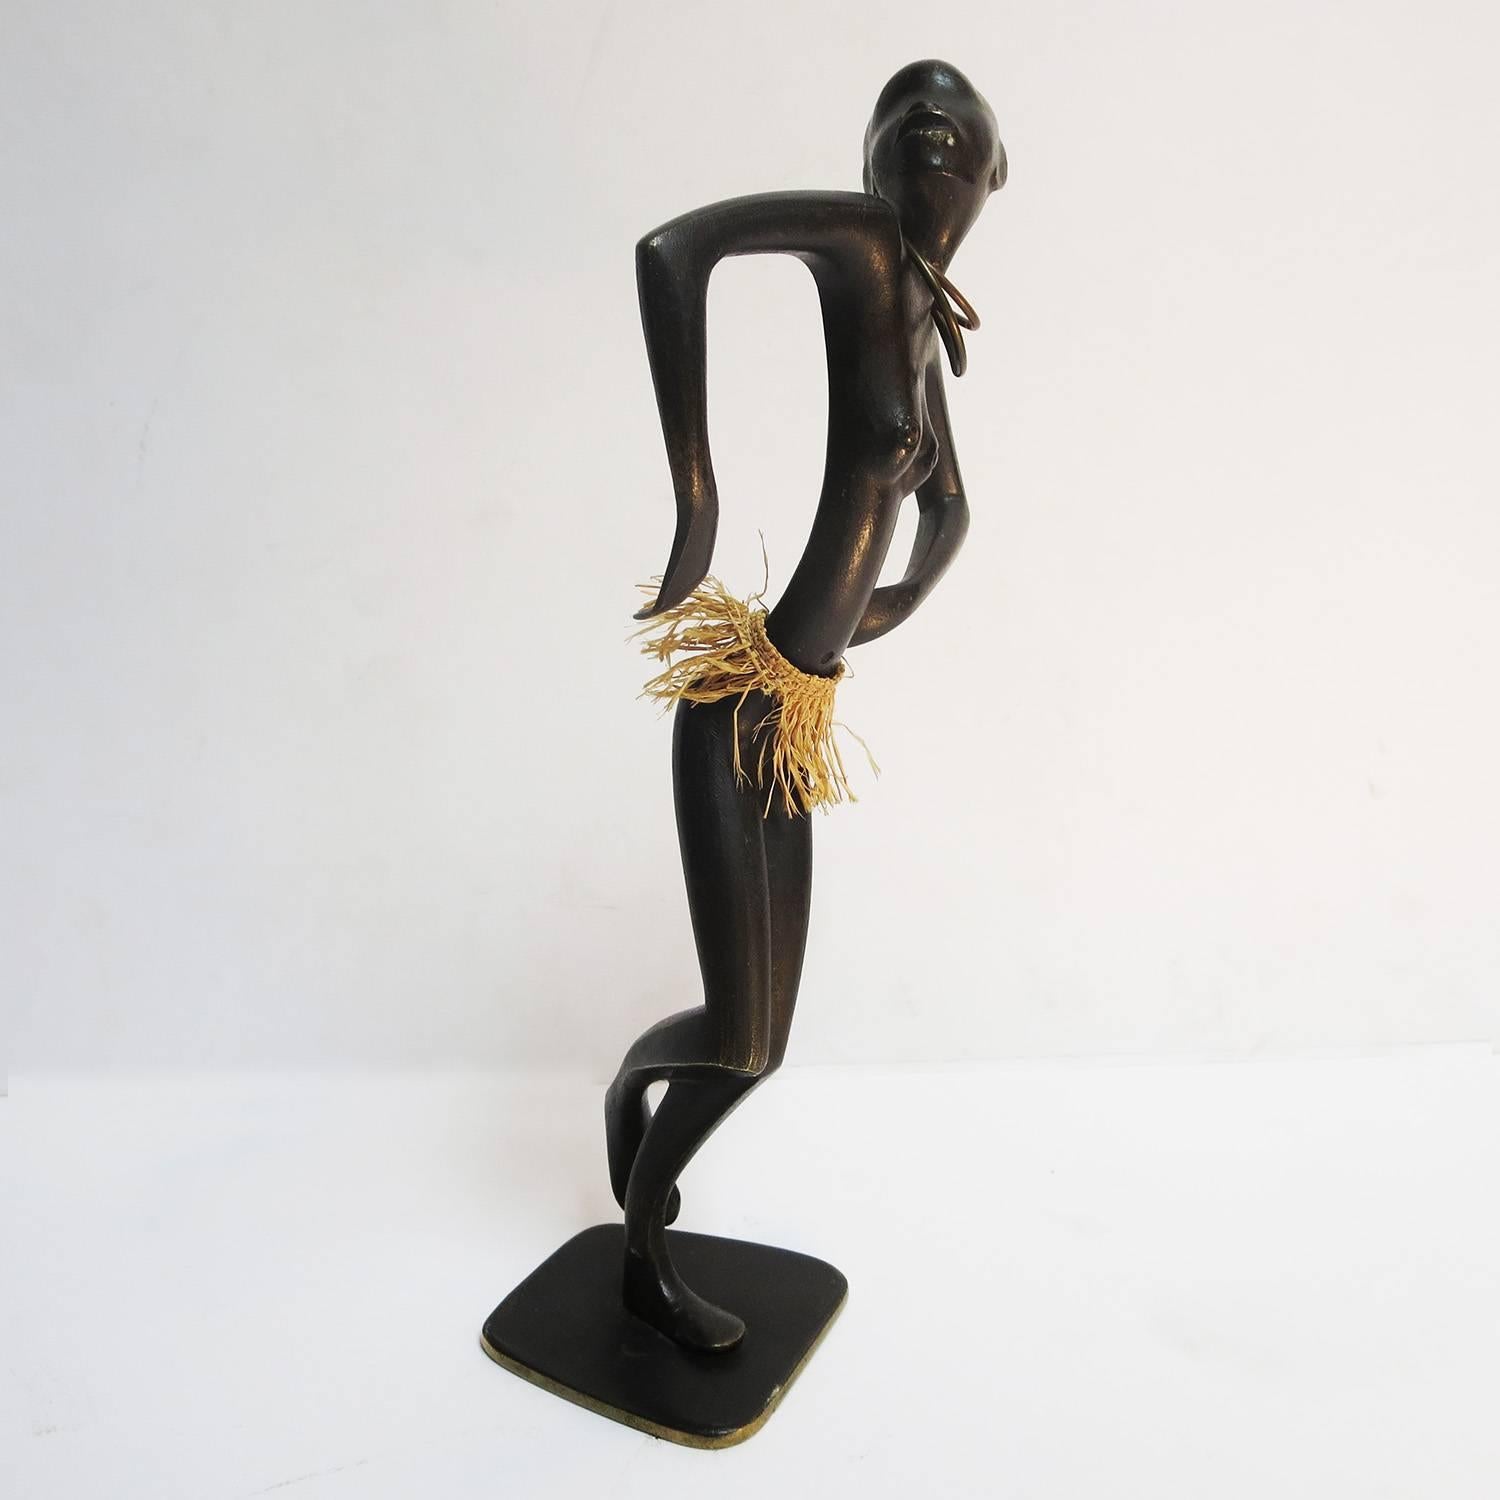 During the Art Deco period of the 1930s, the European designers were greatly influenced by African culture and design. Karl Hagenauer was no exception, and employed African references freely in his works. This dancing woman is a classic example of